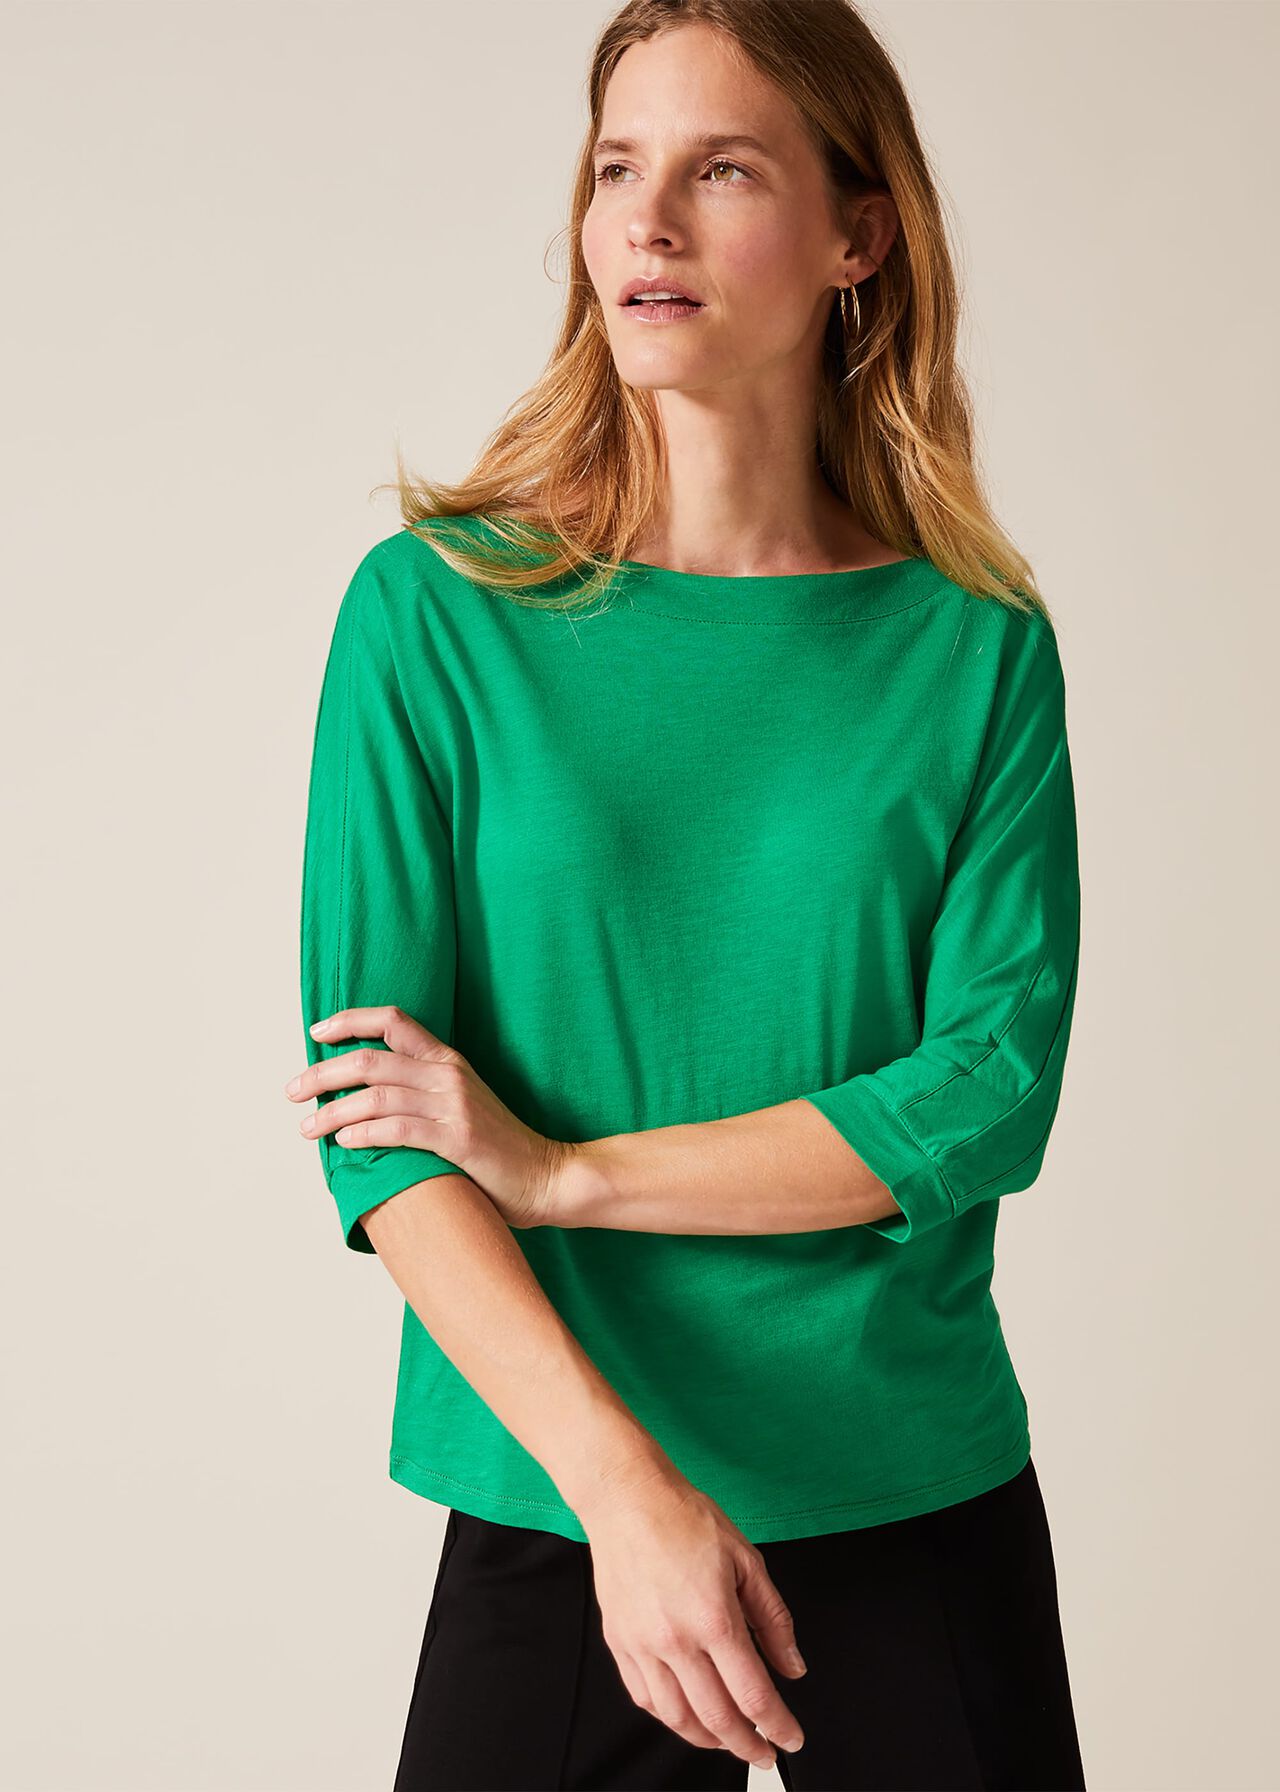 Belle 3/4 Sleeve Top | Phase Eight